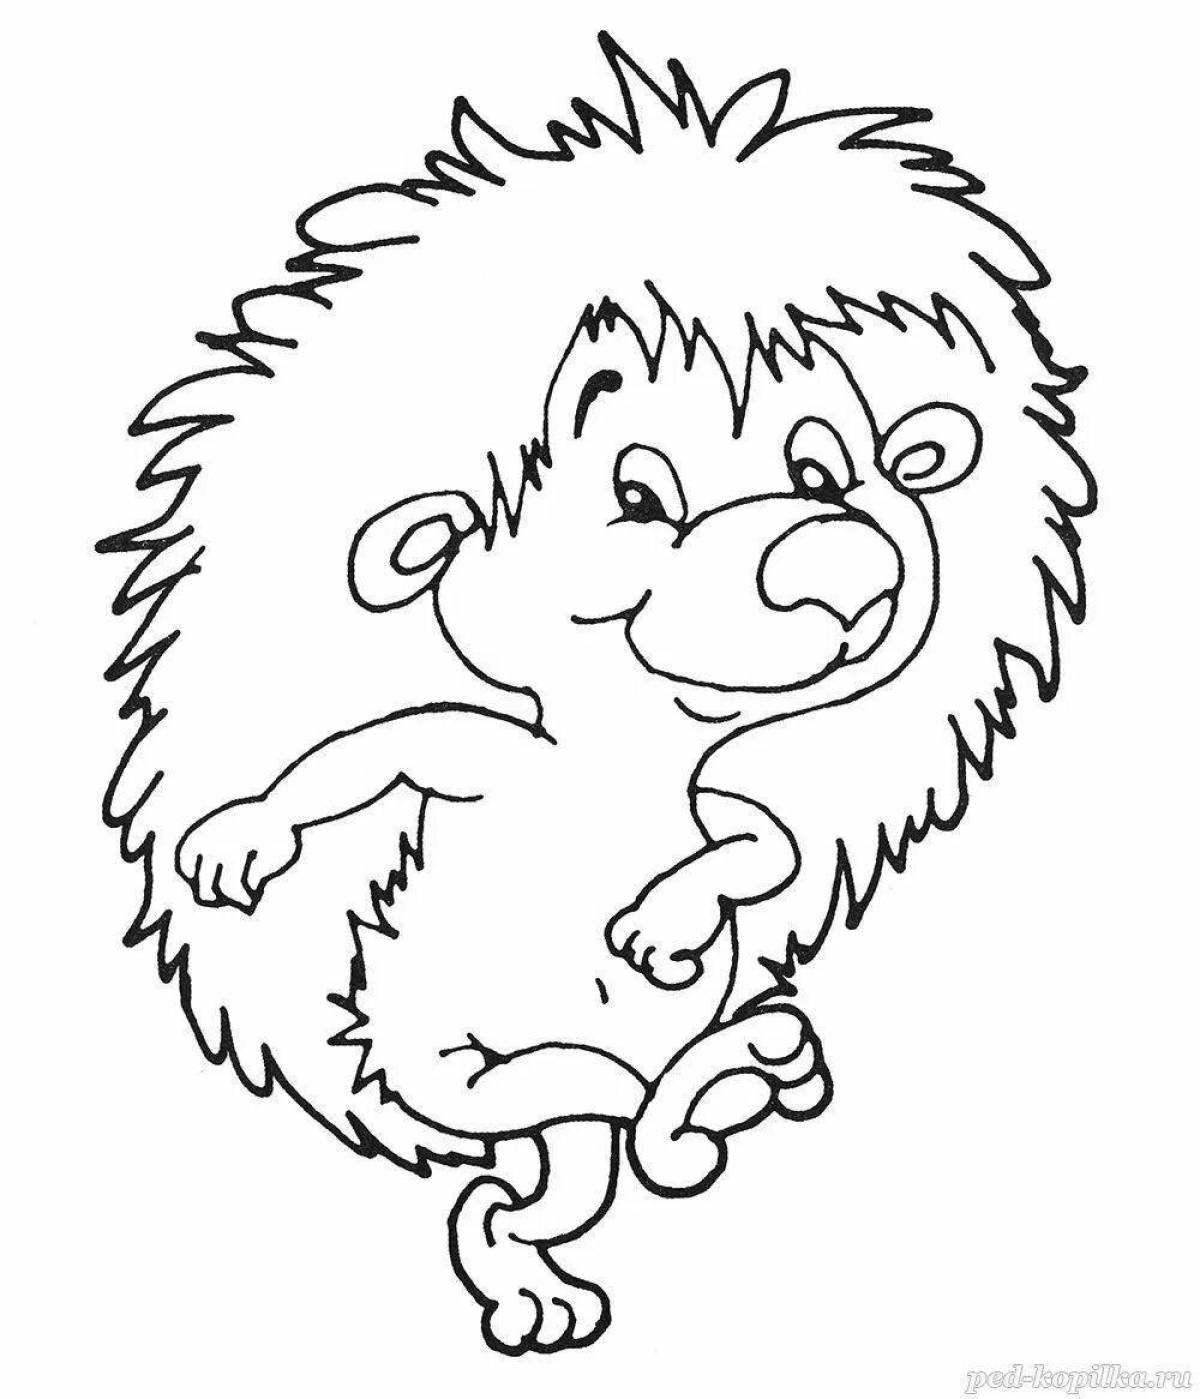 Fancy hedgehog coloring pages for kids